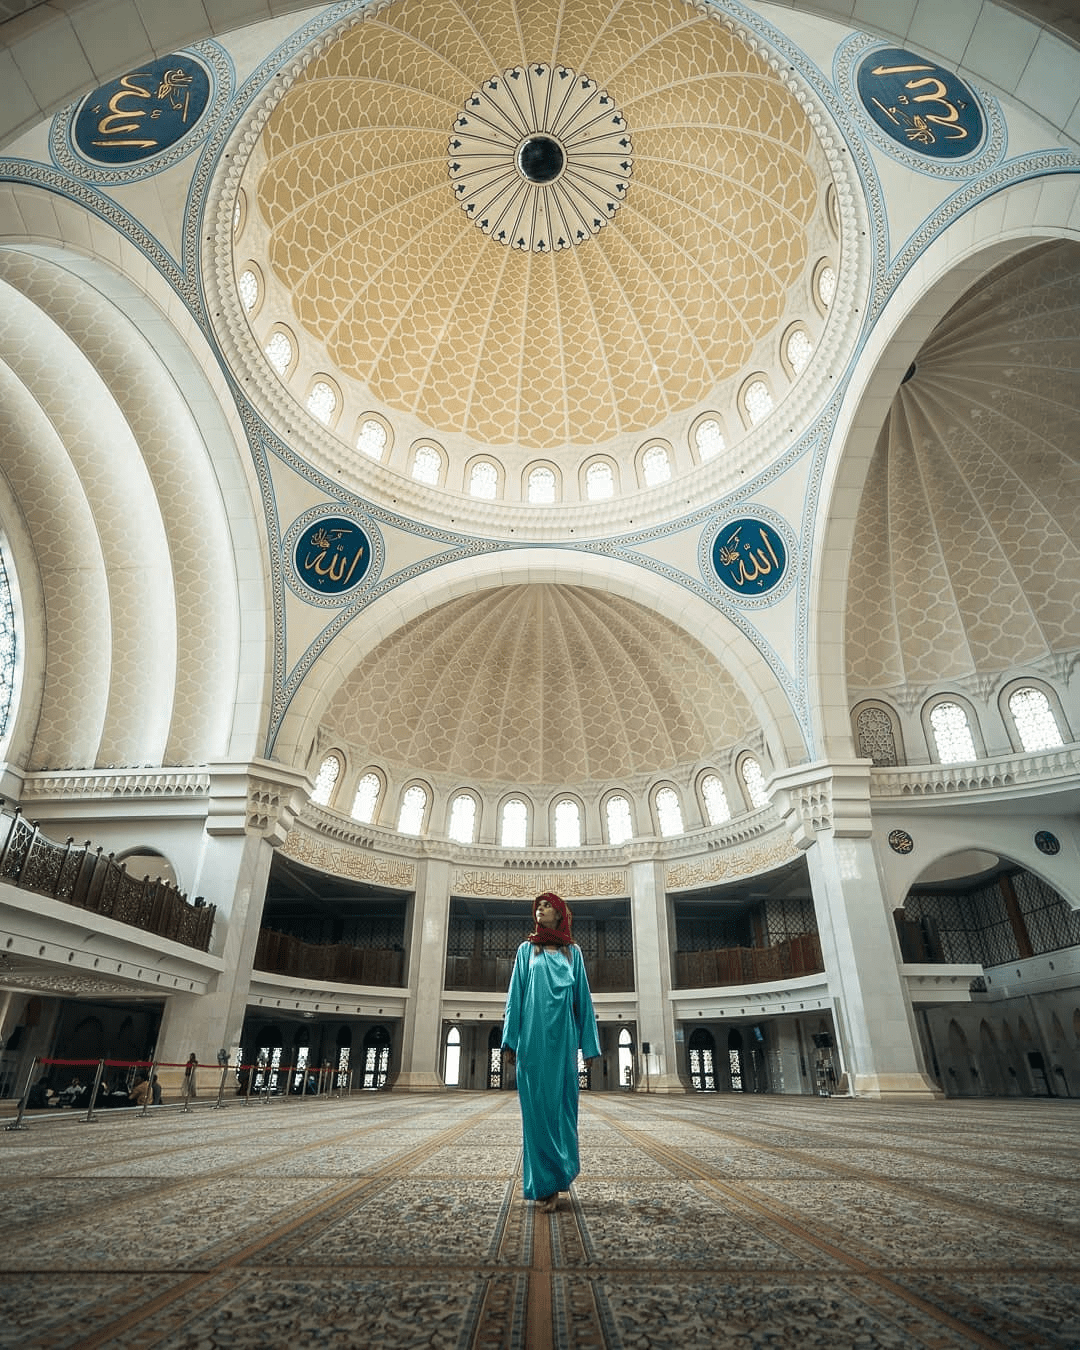 Unique mosques in Malaysia - Federal Territory Mosque